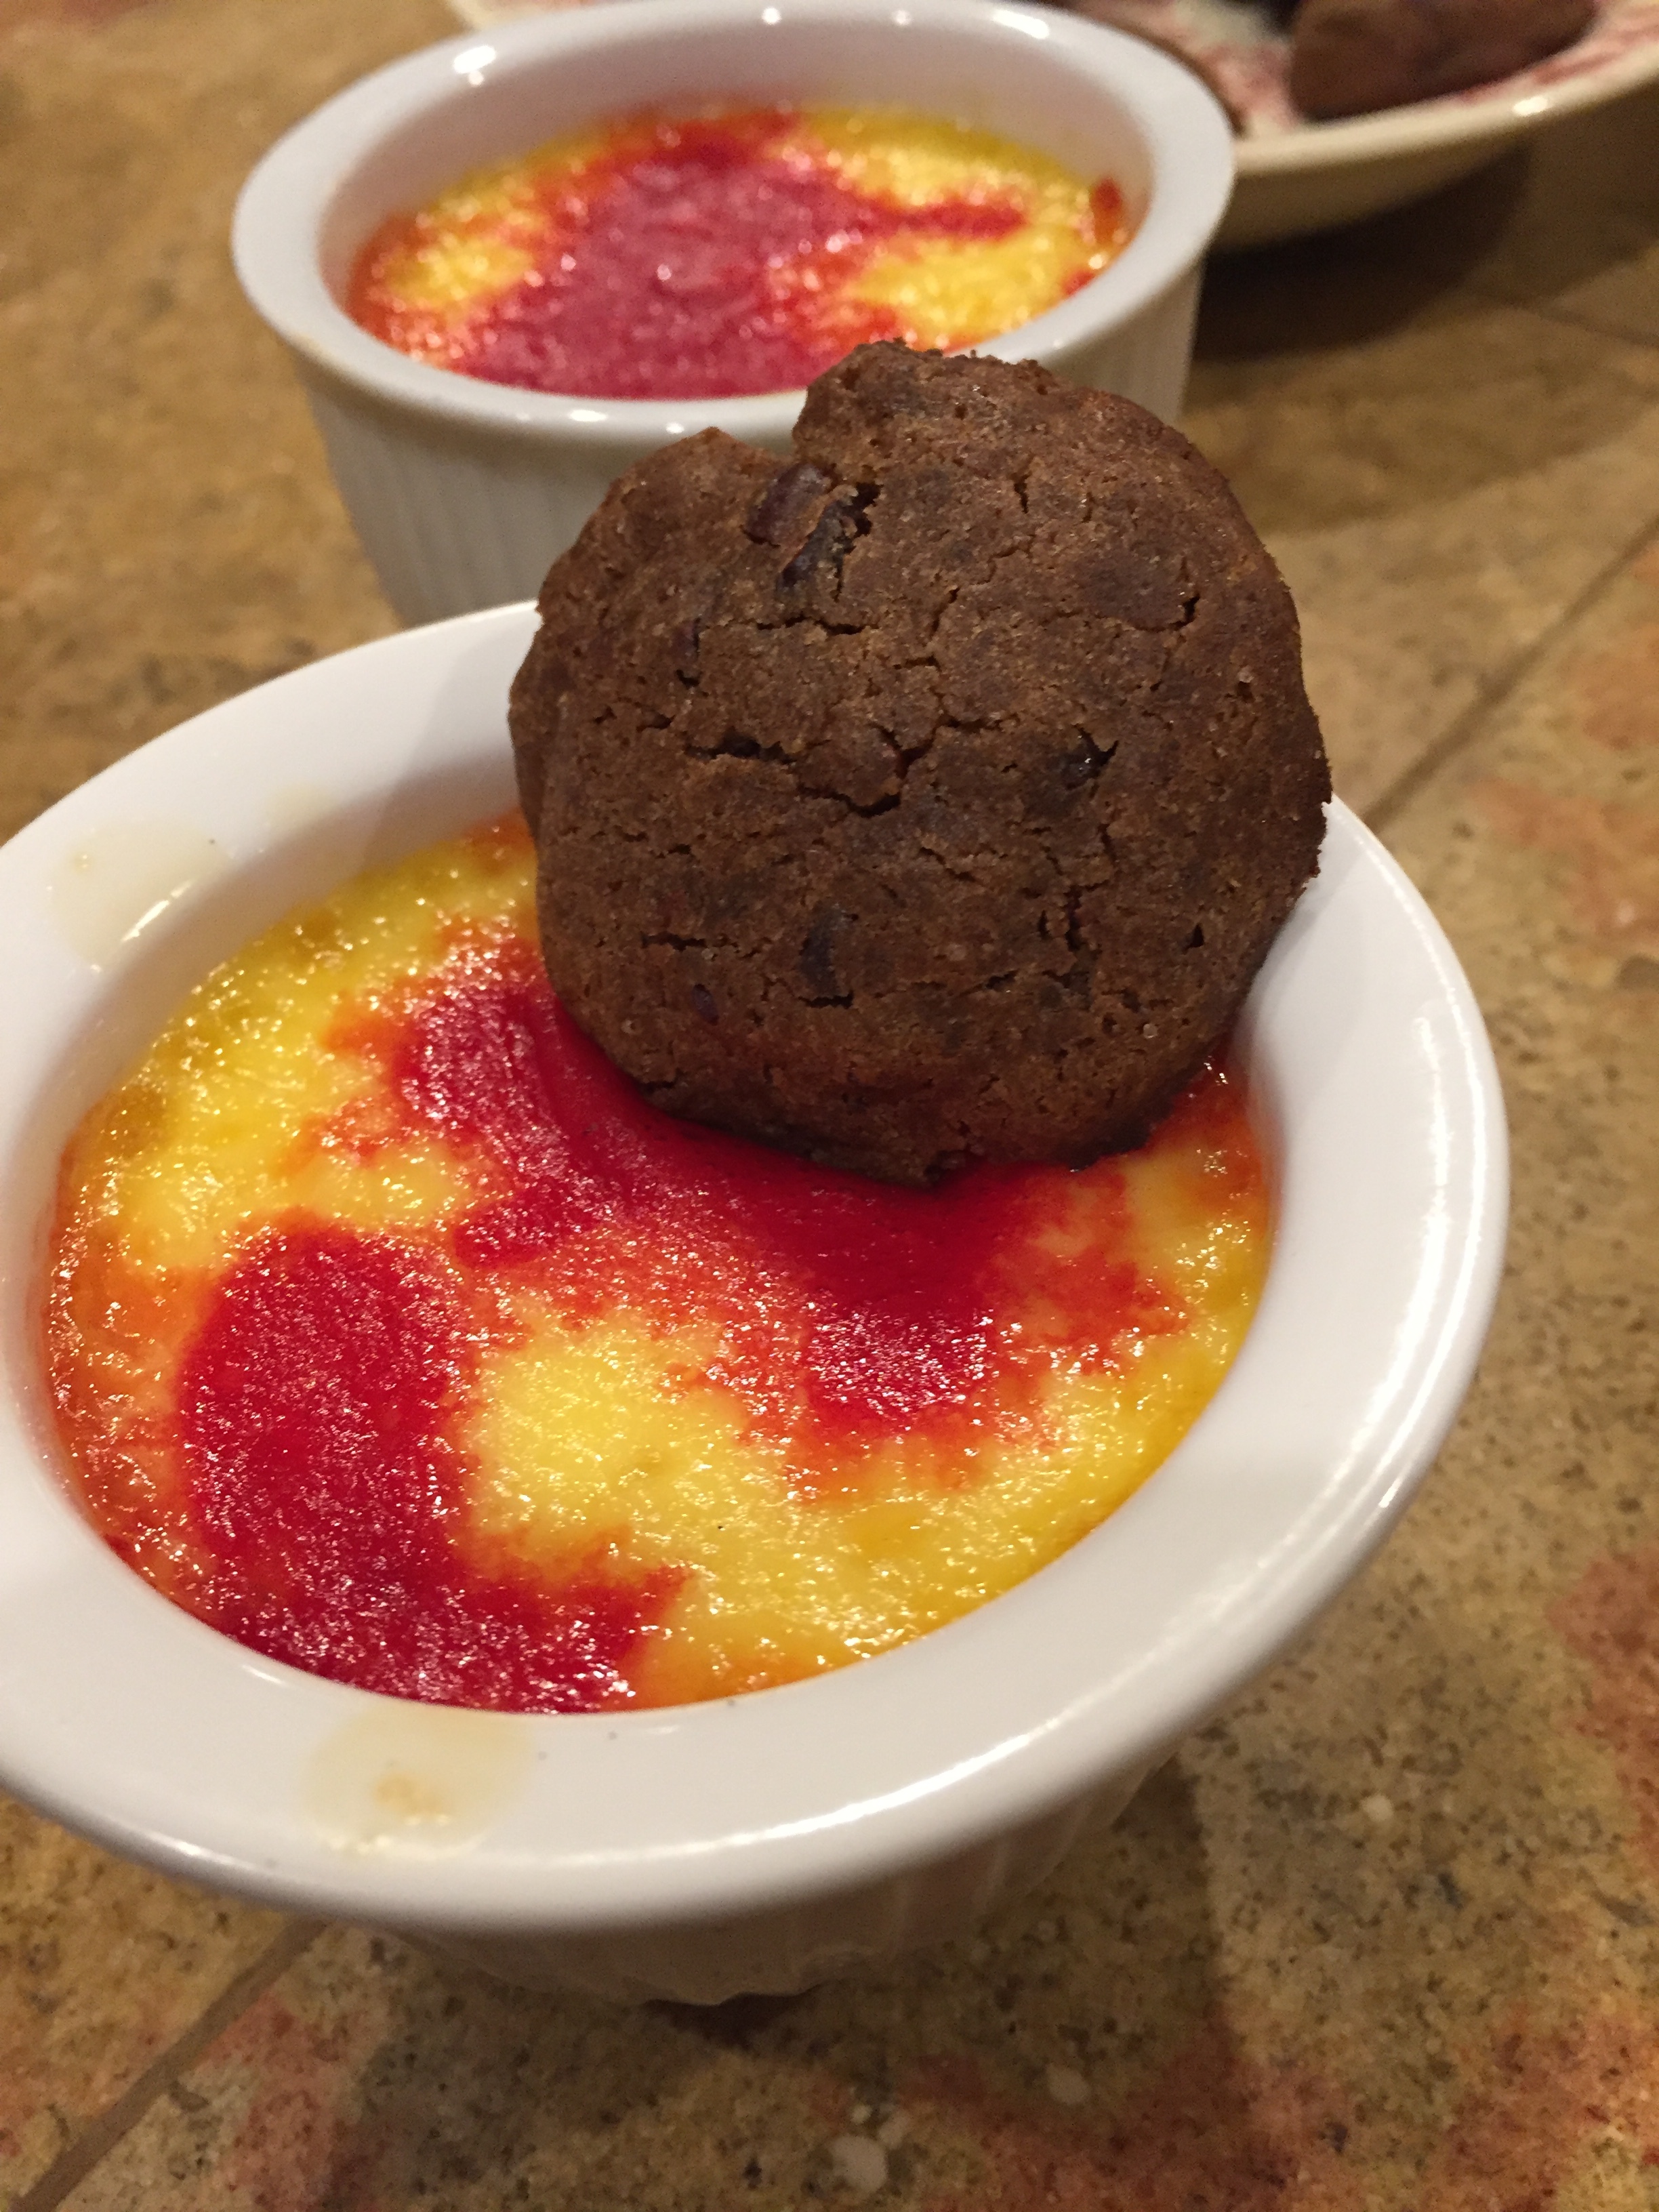 Prickly Pear Brulee' with Cacao Nib Cookie.